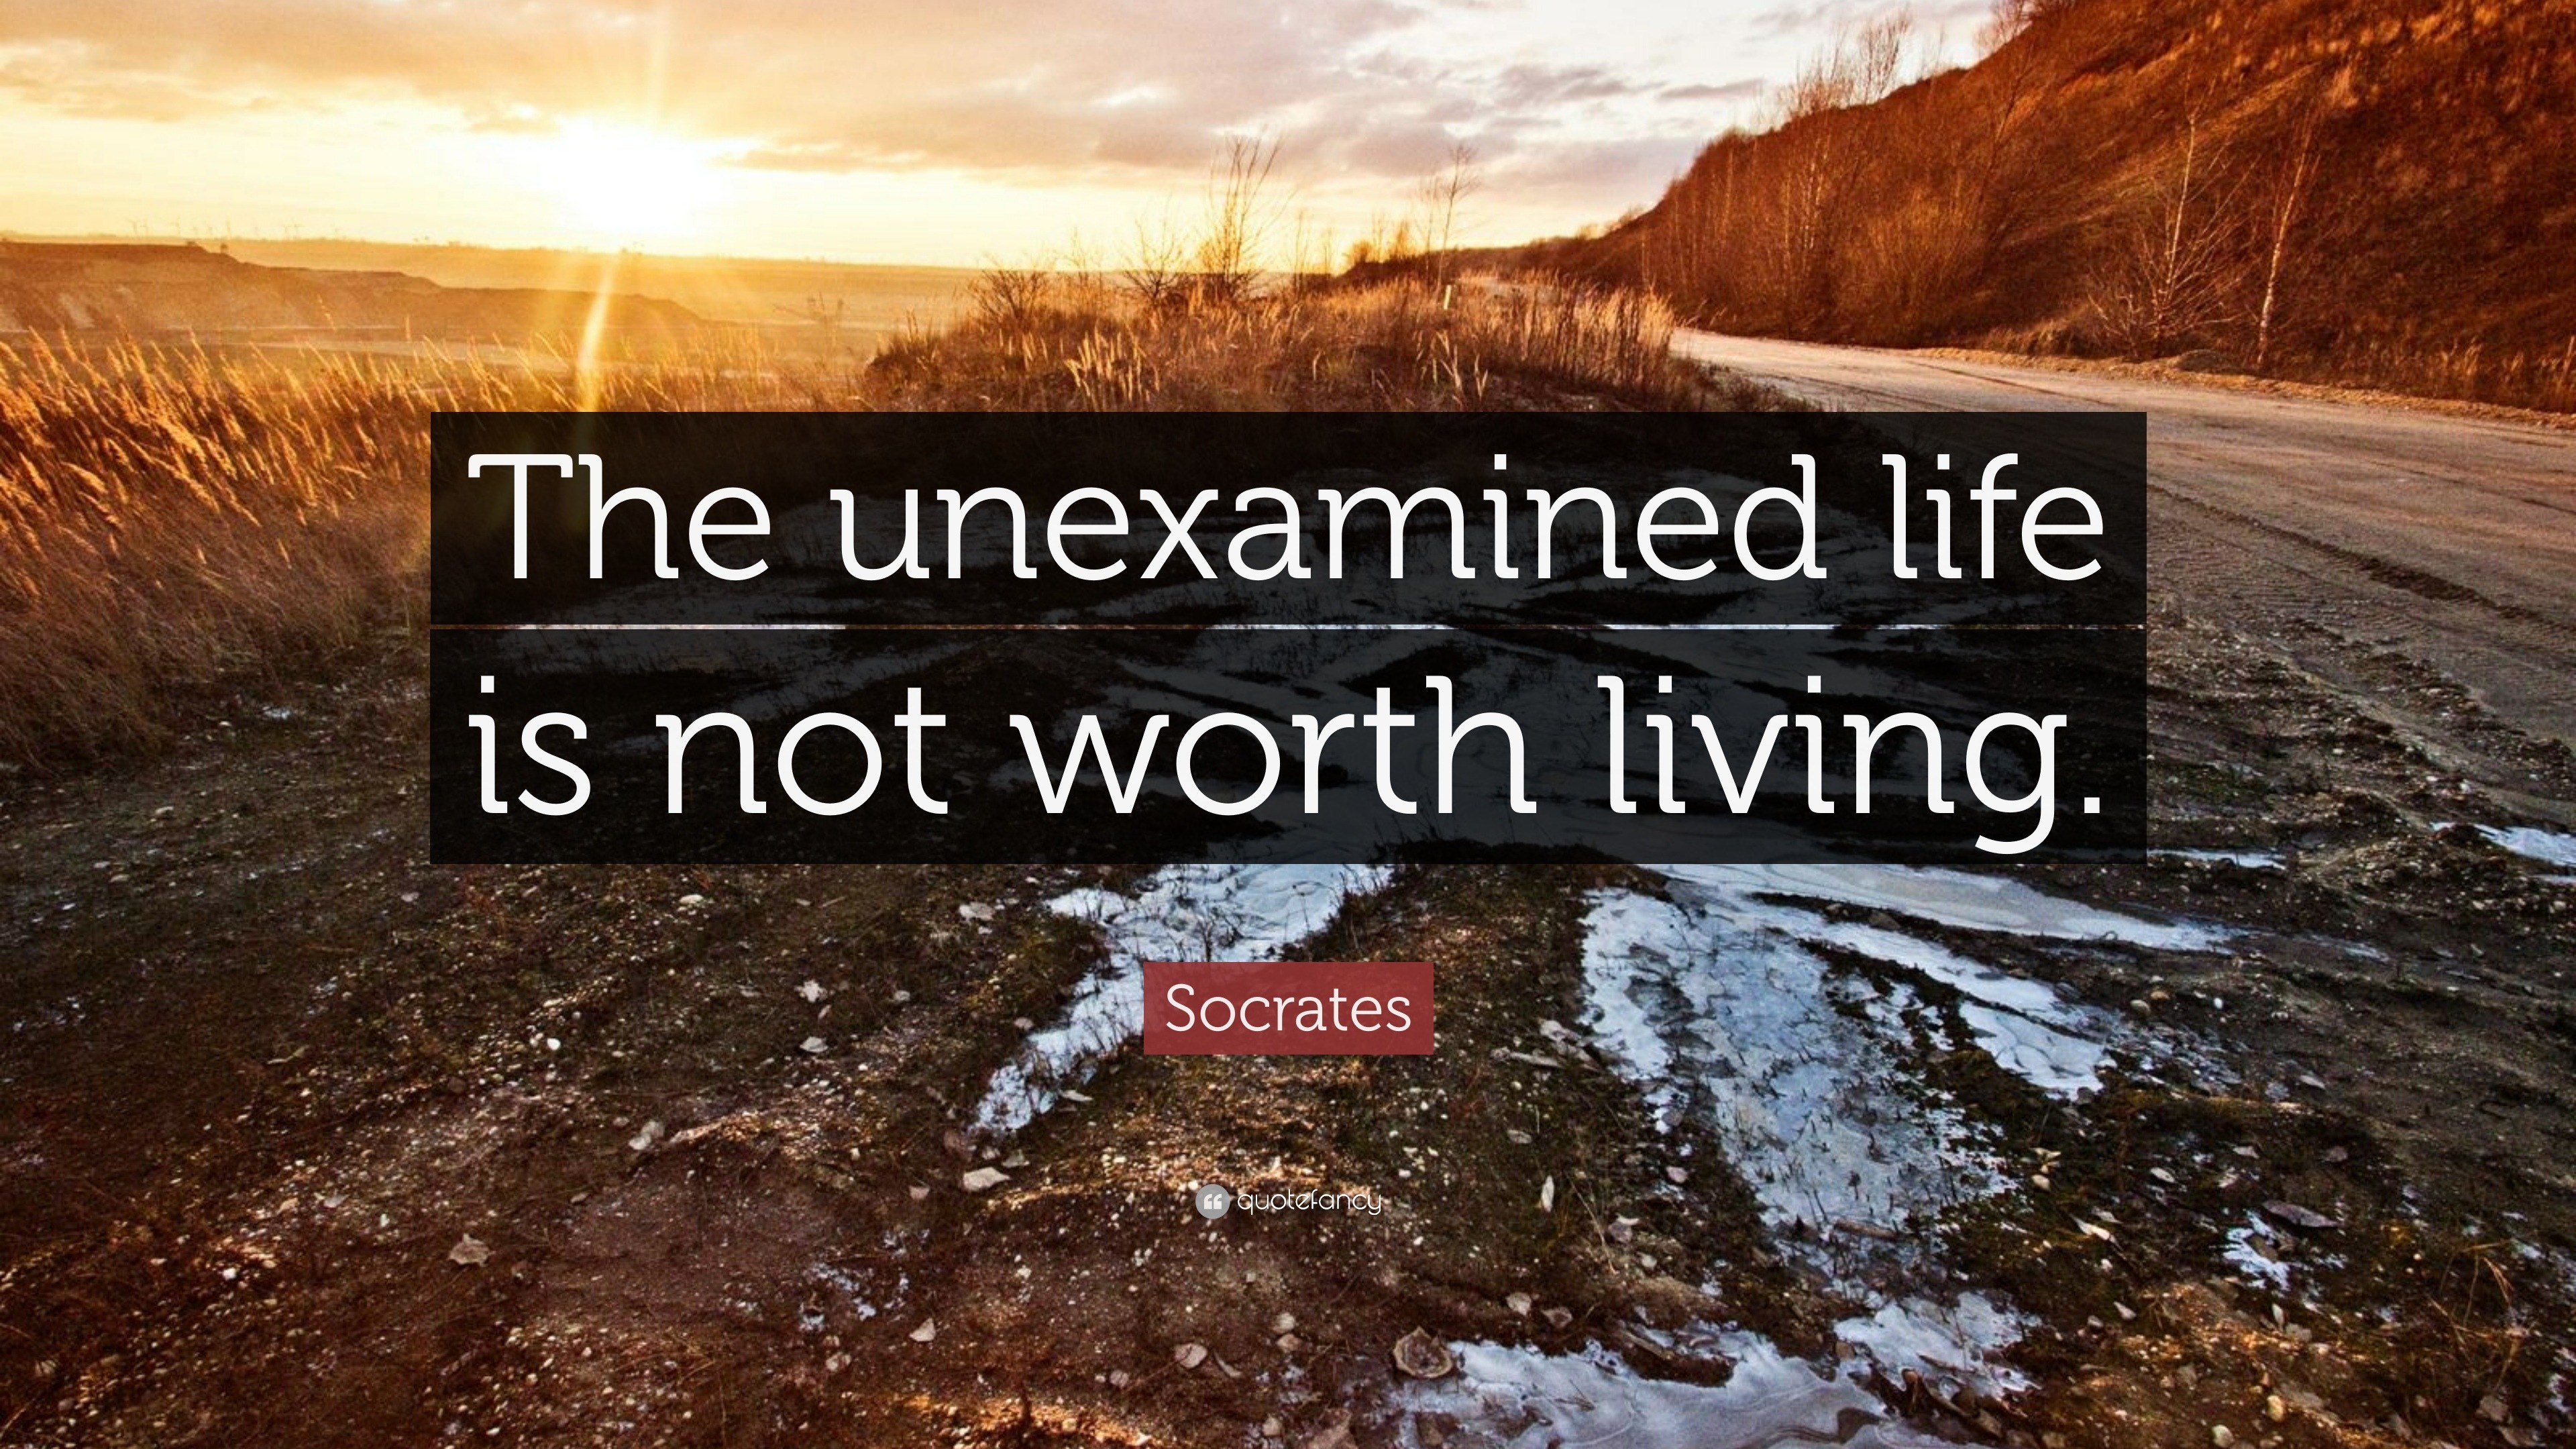 socrates the unexamined life is not worth living meaning